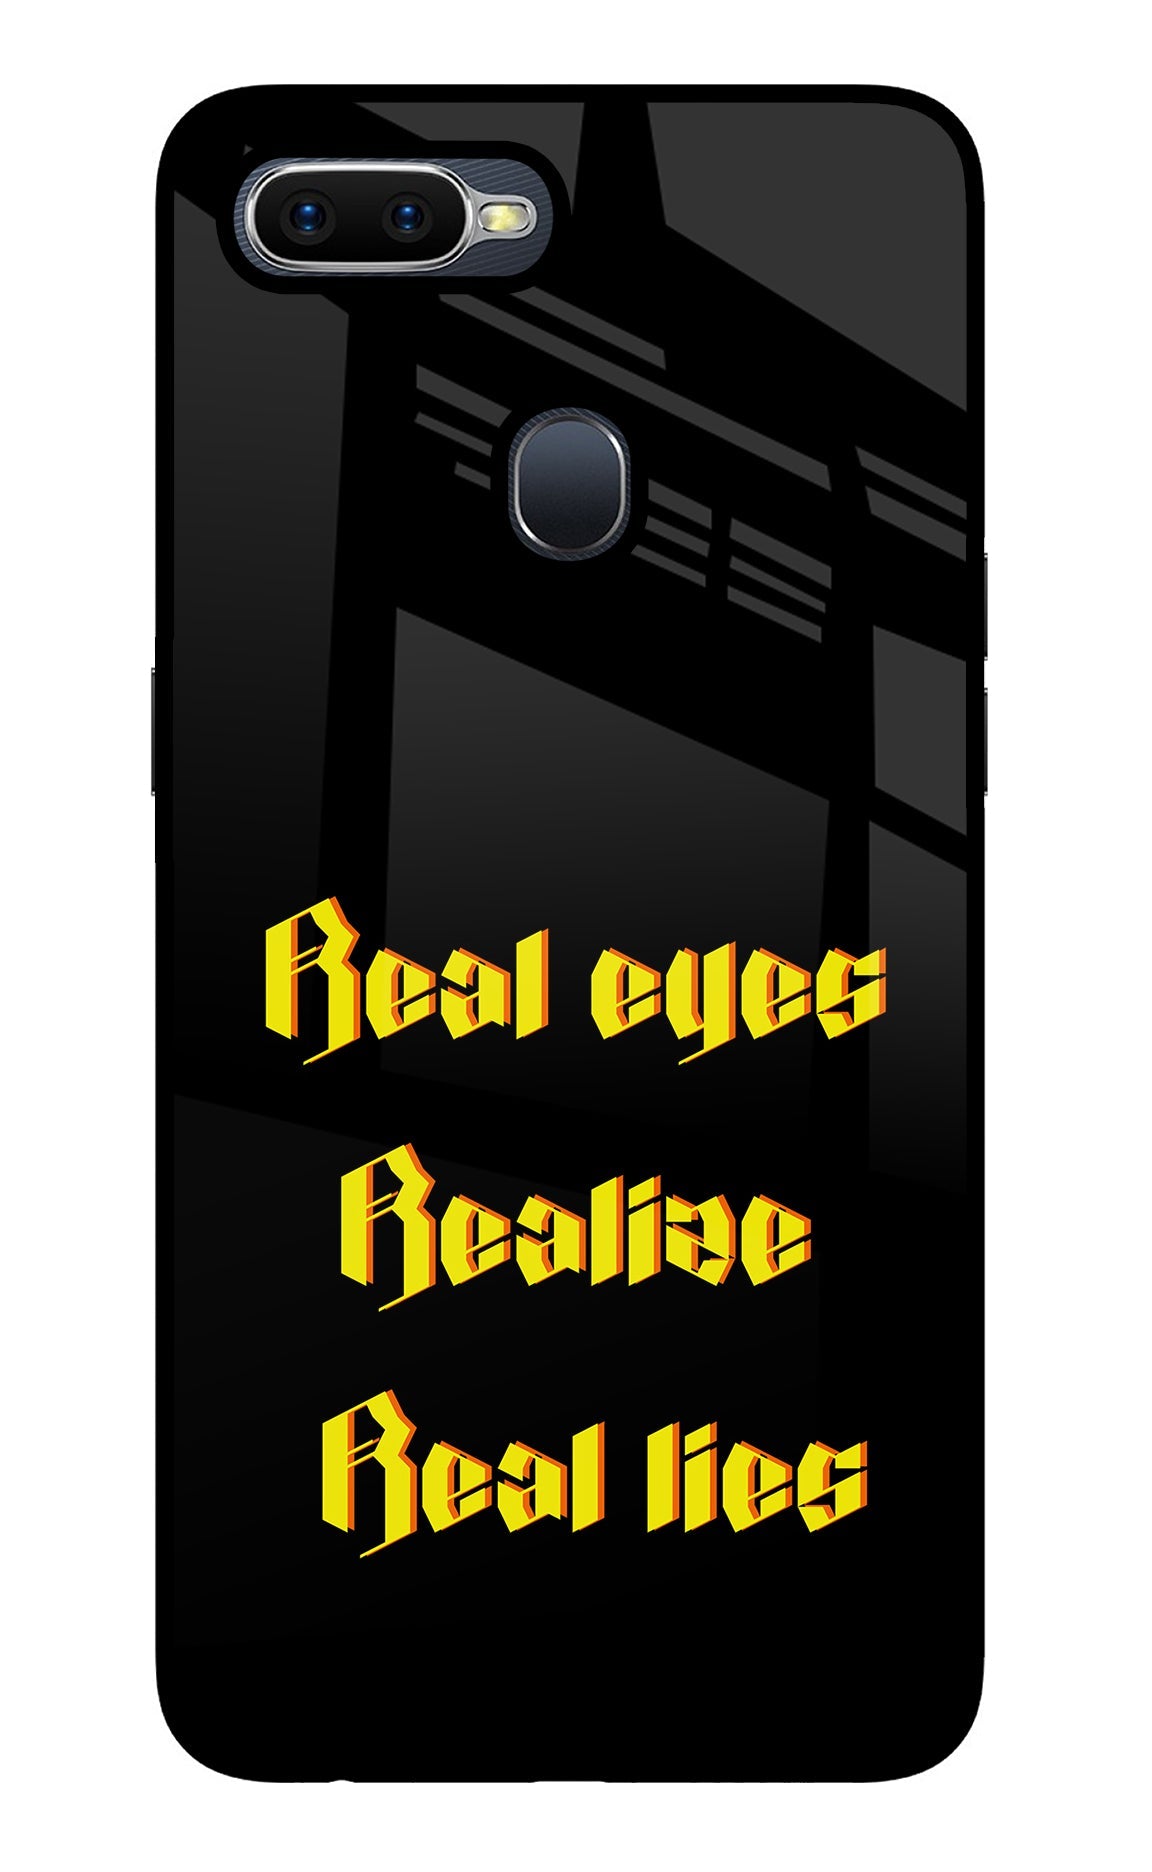 Real Eyes Realize Real Lies Oppo F9/F9 Pro Glass Case